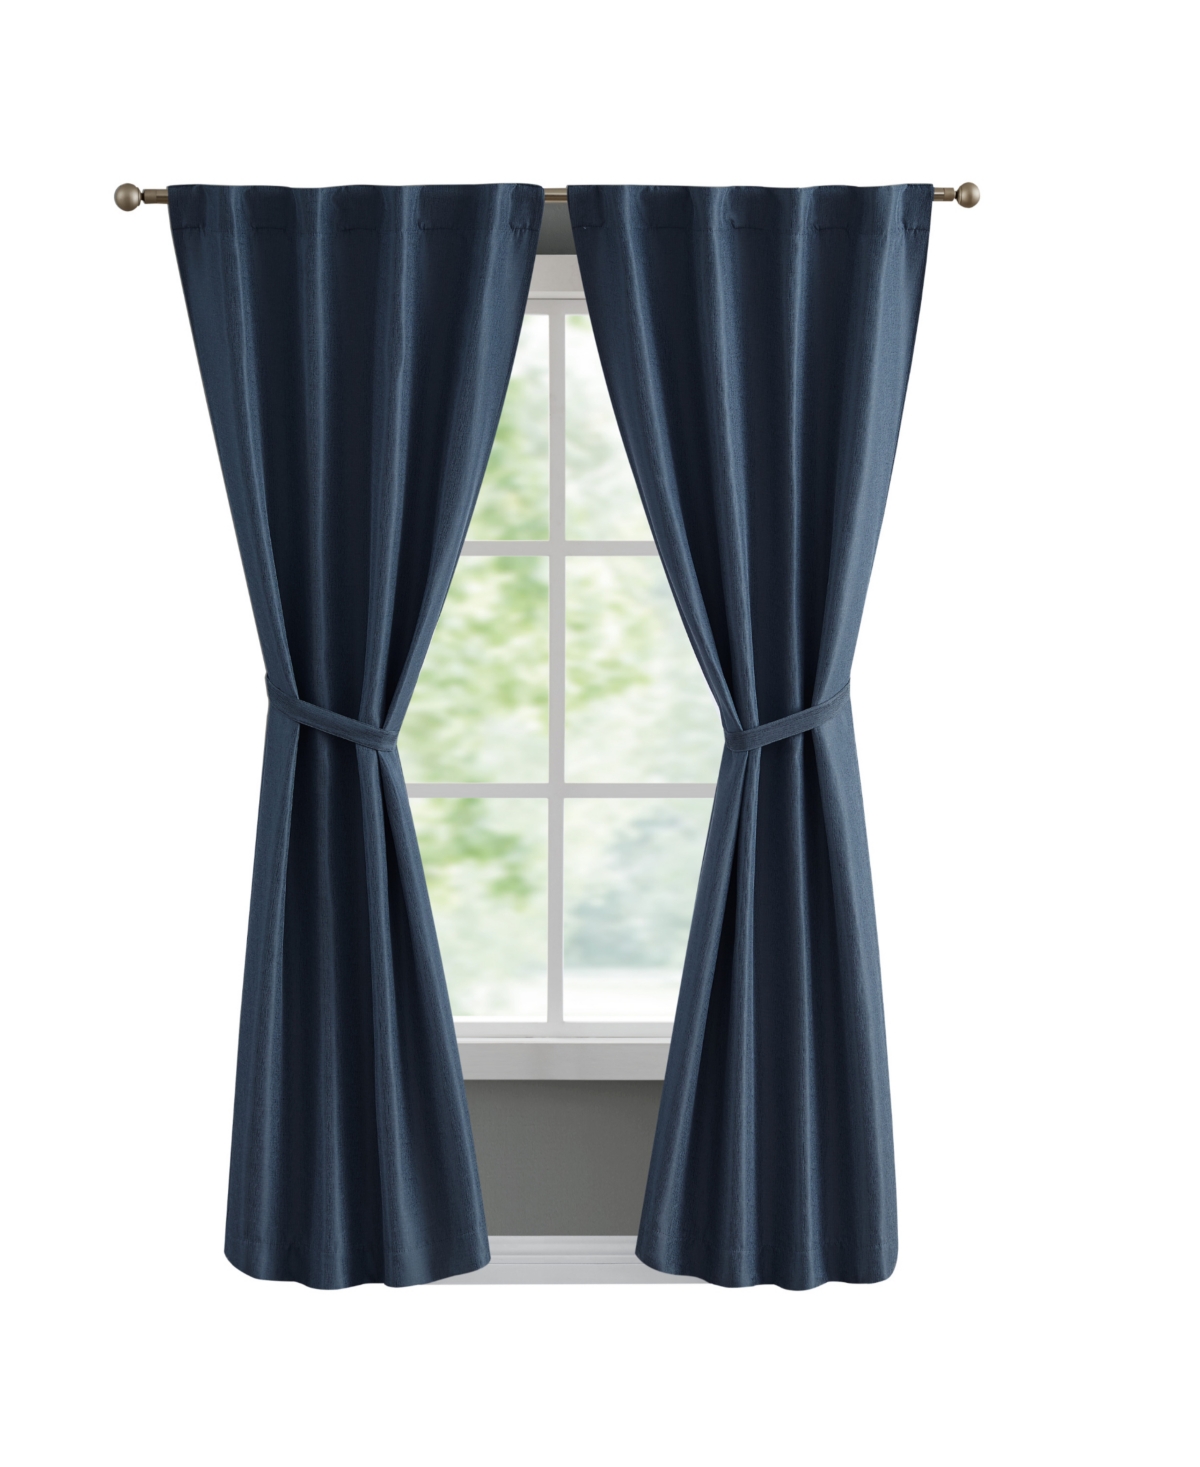 French Connection Val Thermal Woven Room Darkening Back Tab Window Curtain Panel Pair With Tiebacks, 38" X 96" In Indigo